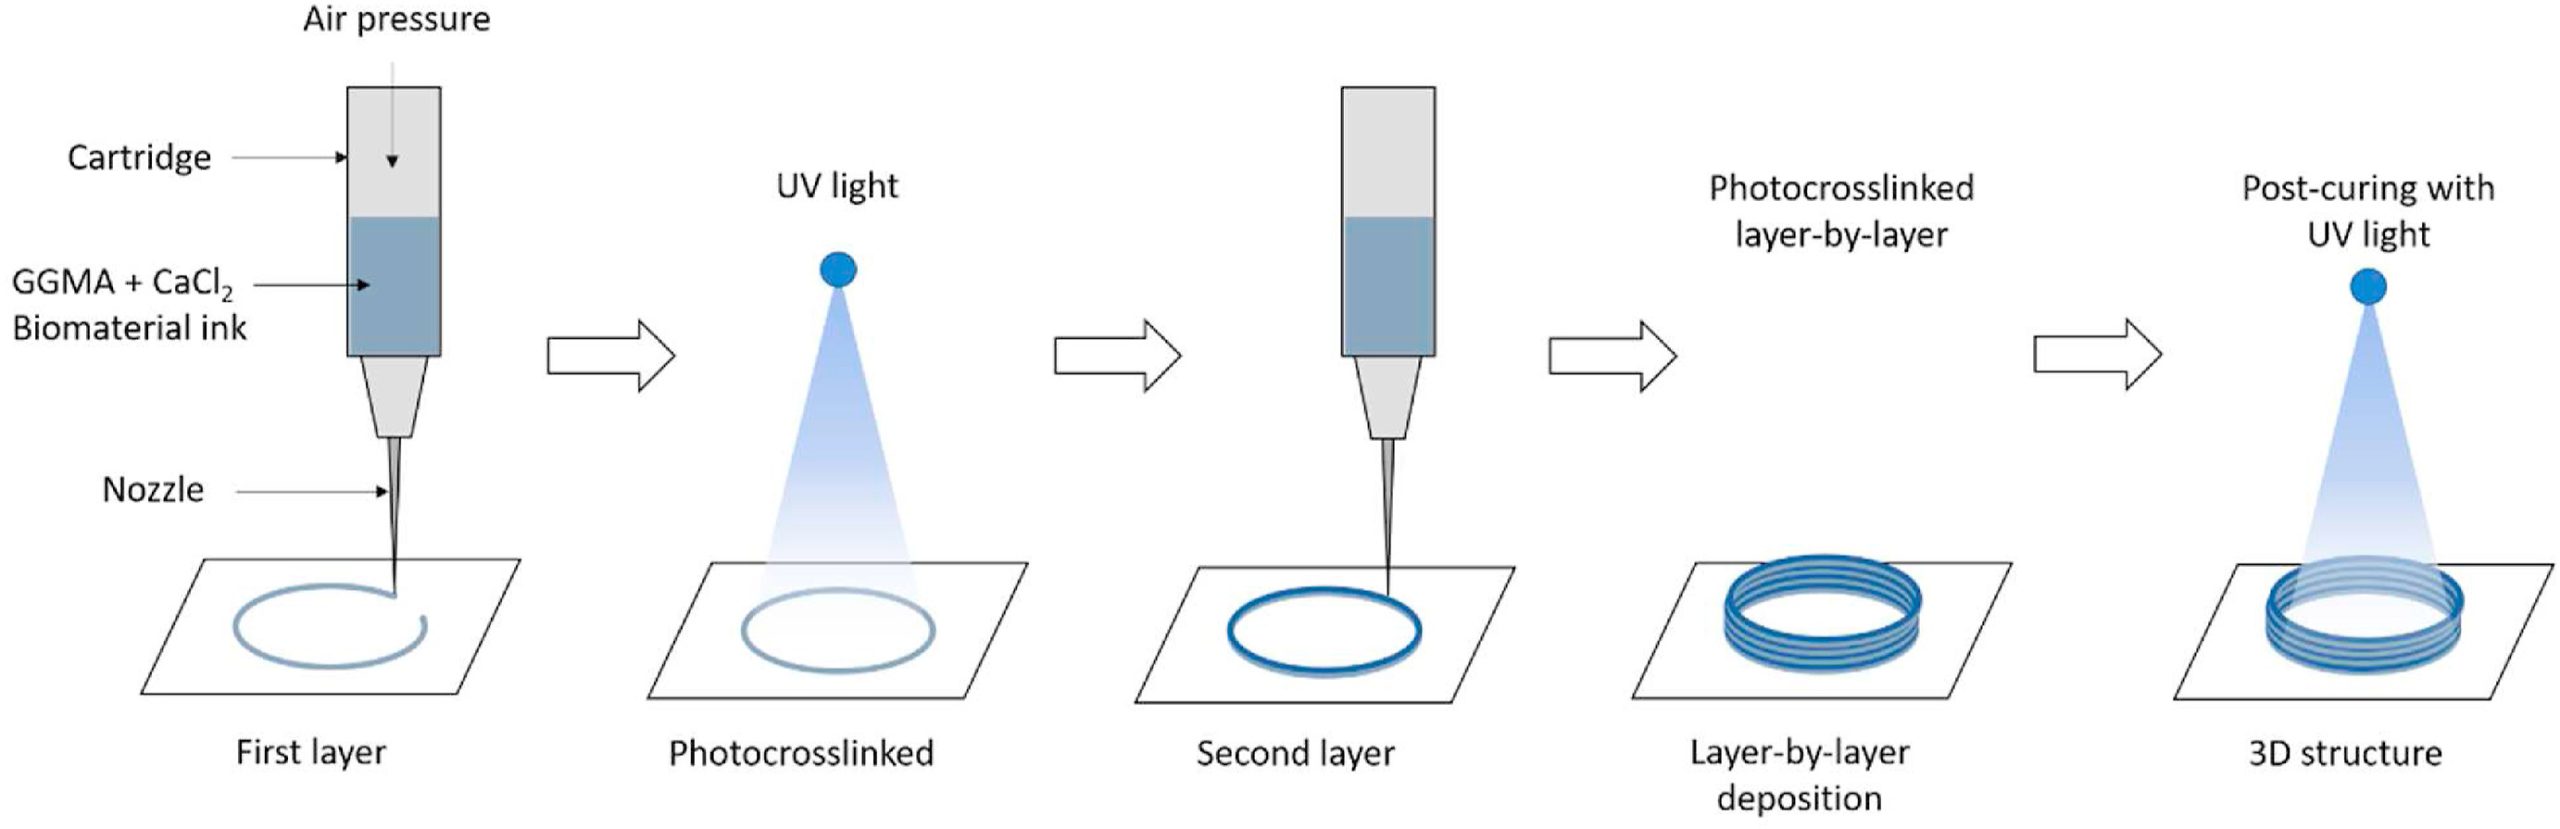 Process flow of the extrusion-based 3D bioprinting process. Image via Biomaterials.